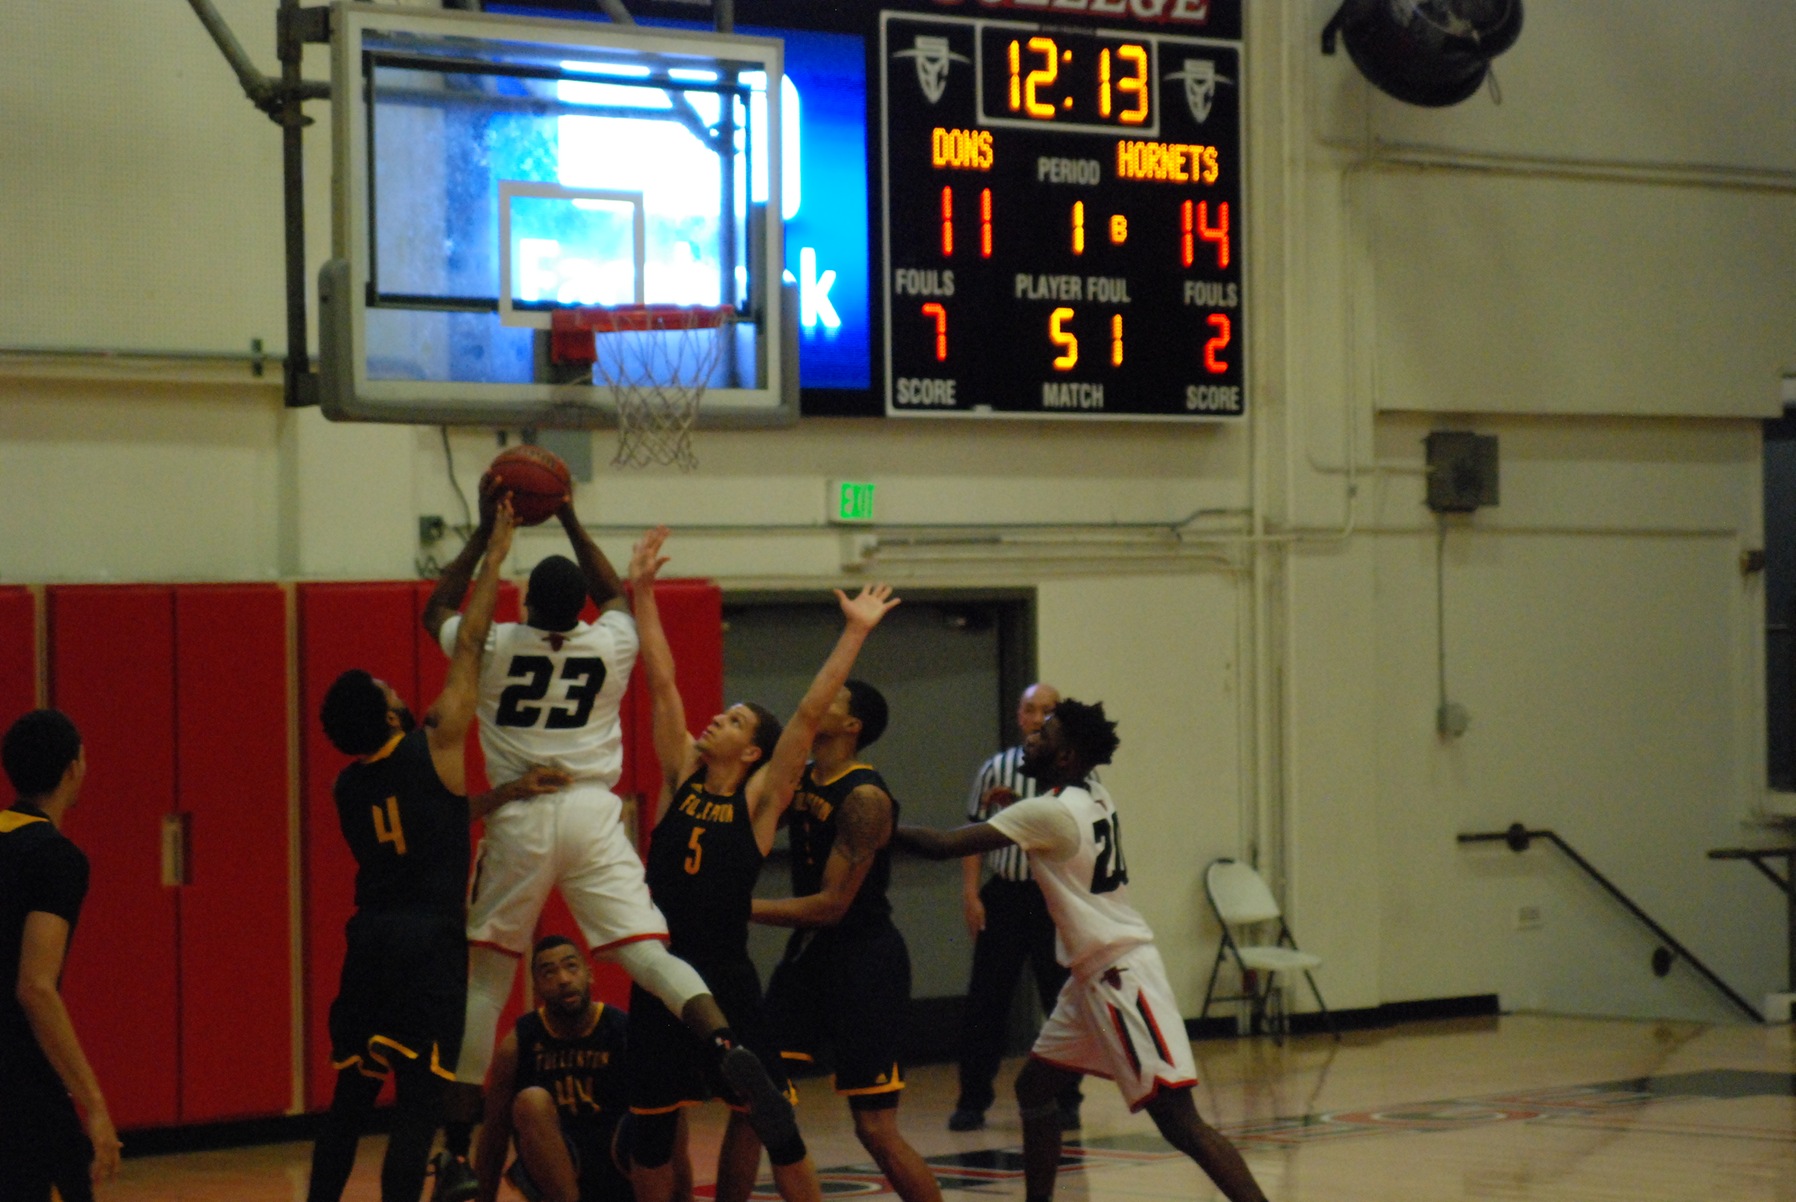 The Dons (5-13) had a higher free throw percent average than Fullerton (13-5) during the game with 76.2% accuracy.